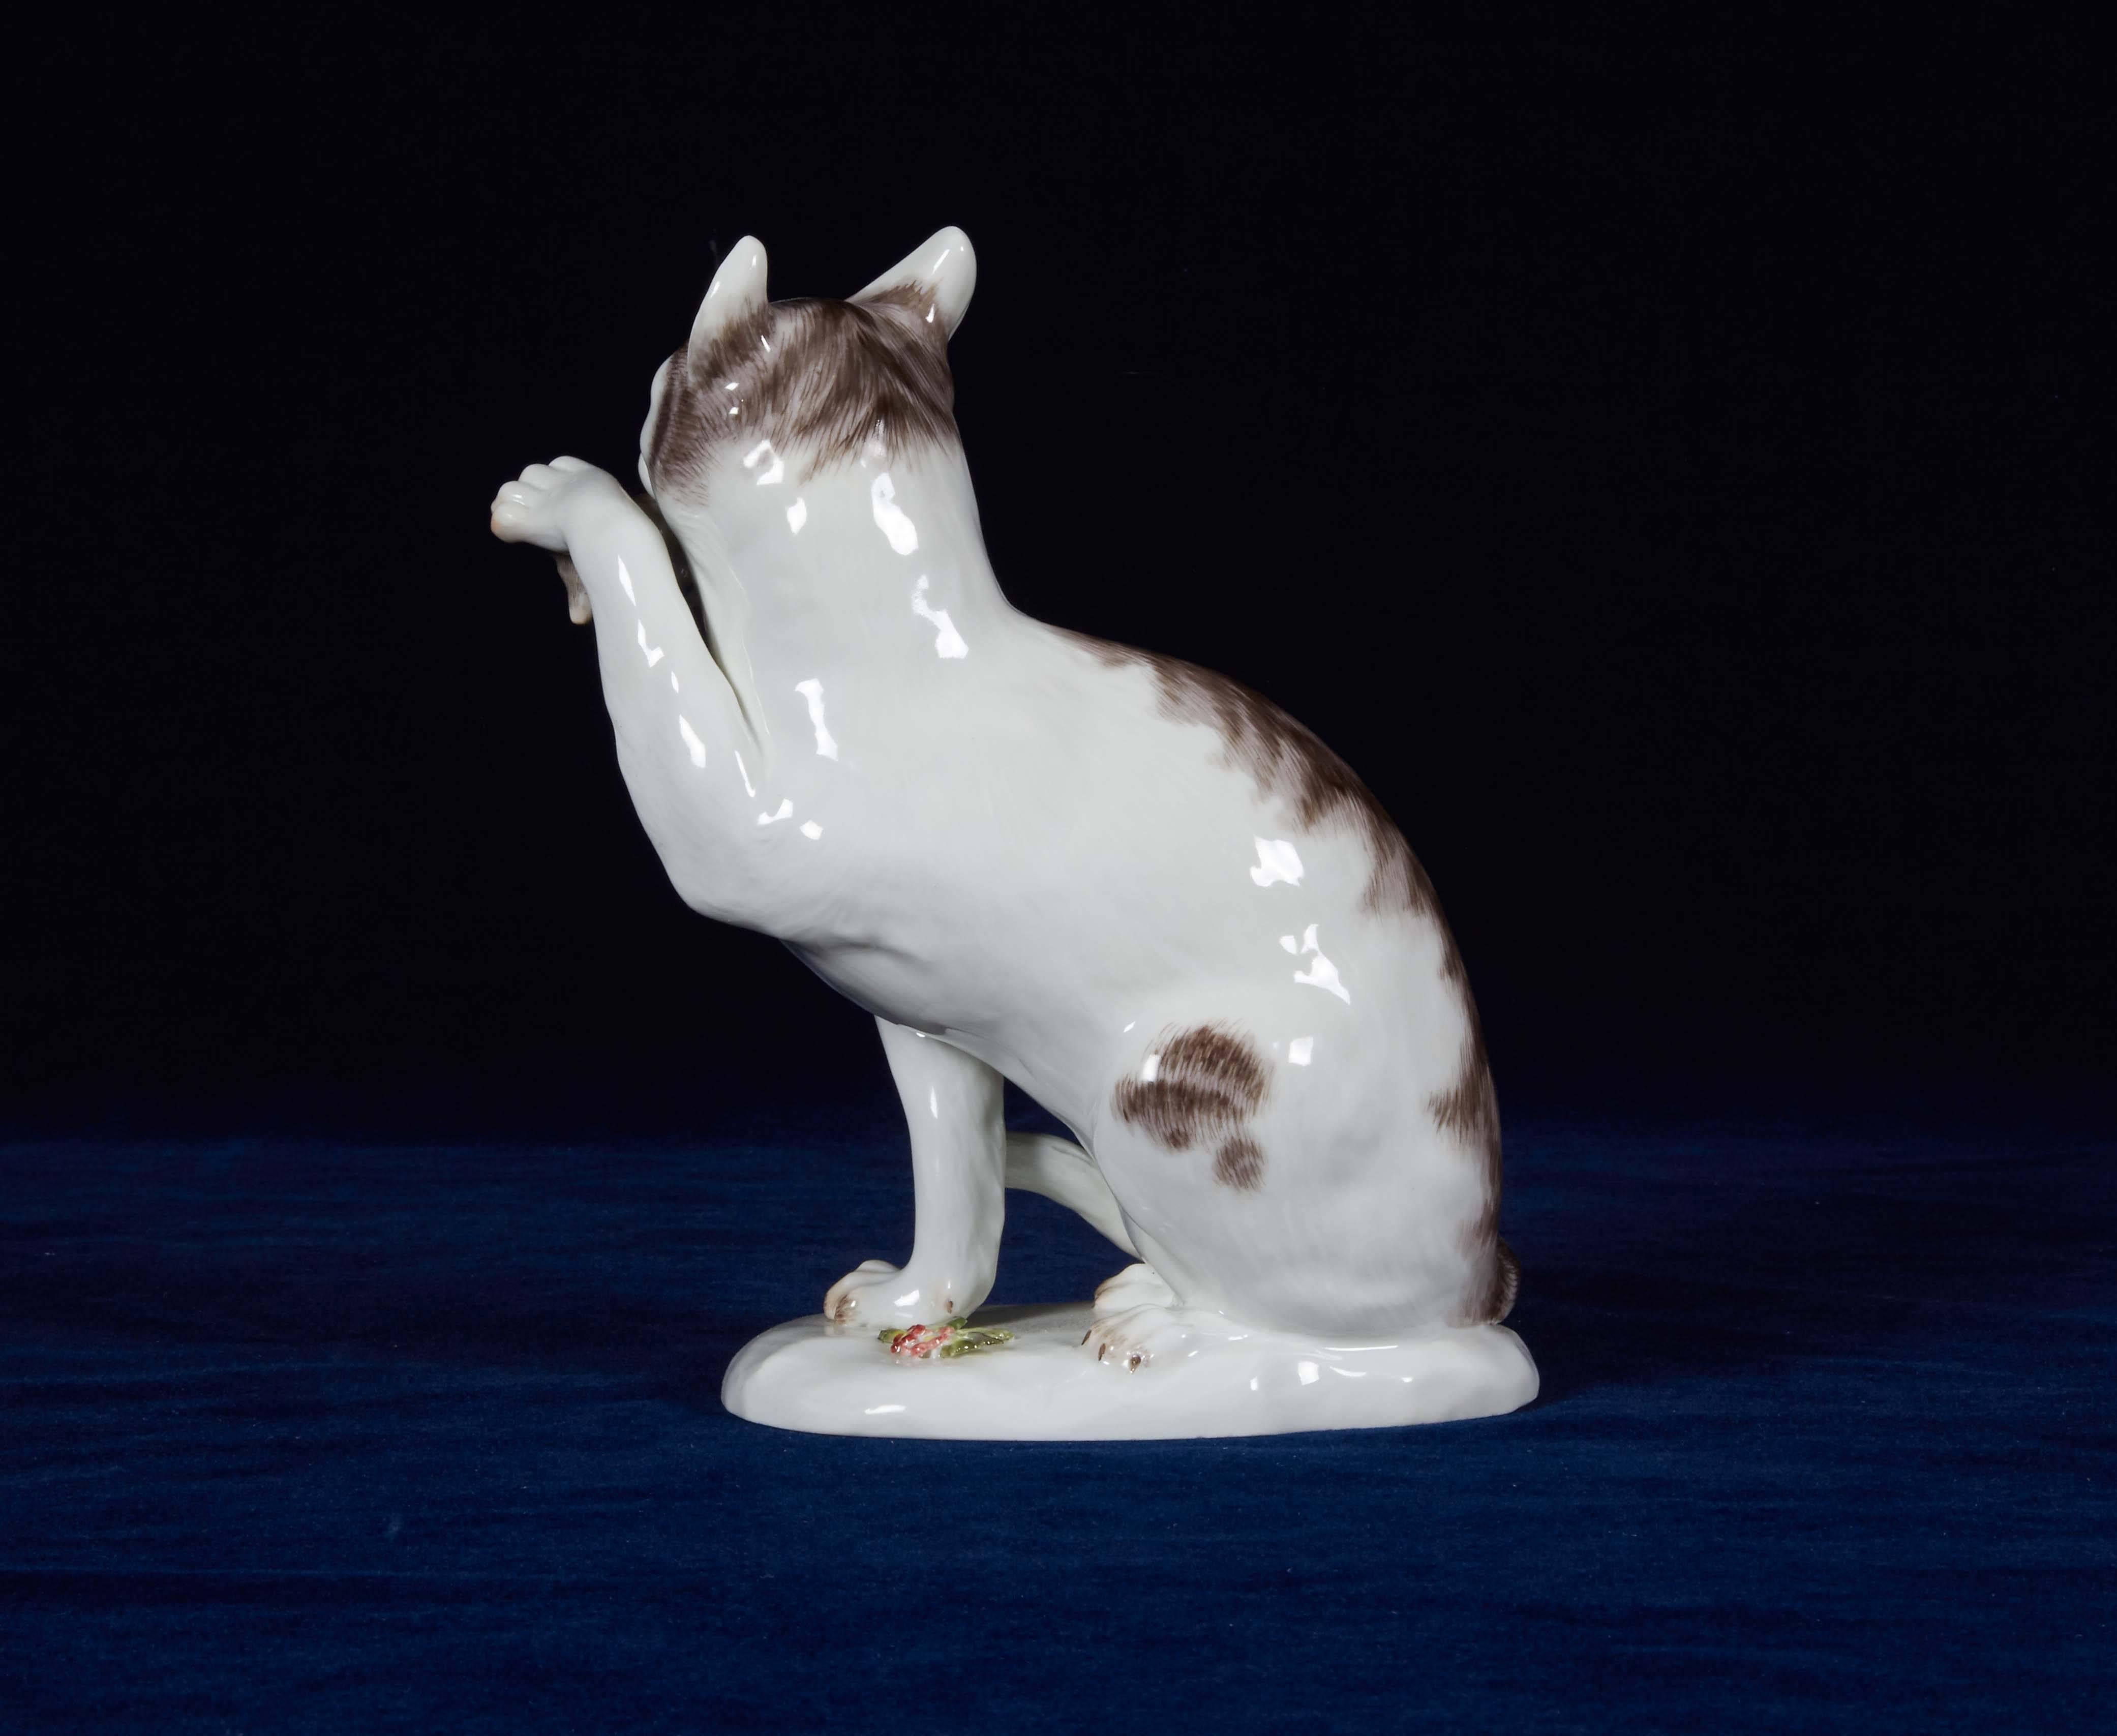 Rococo Meissen Porcelain Group of a Seated Cat, after a Fine Catch, Early 1900s